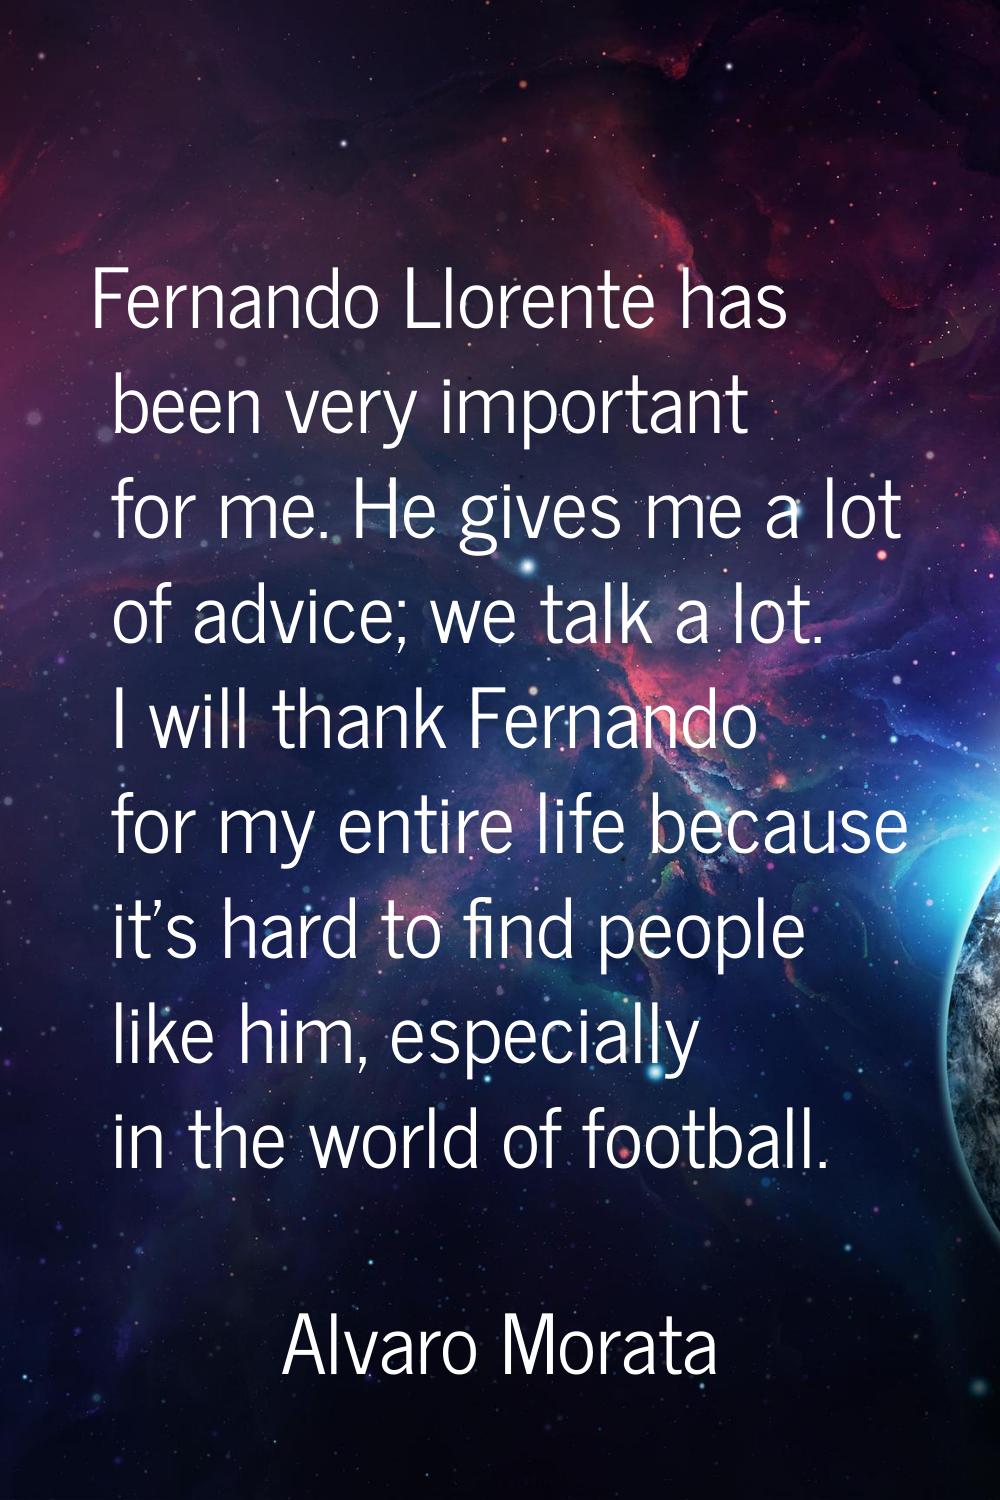 Fernando Llorente has been very important for me. He gives me a lot of advice; we talk a lot. I wil